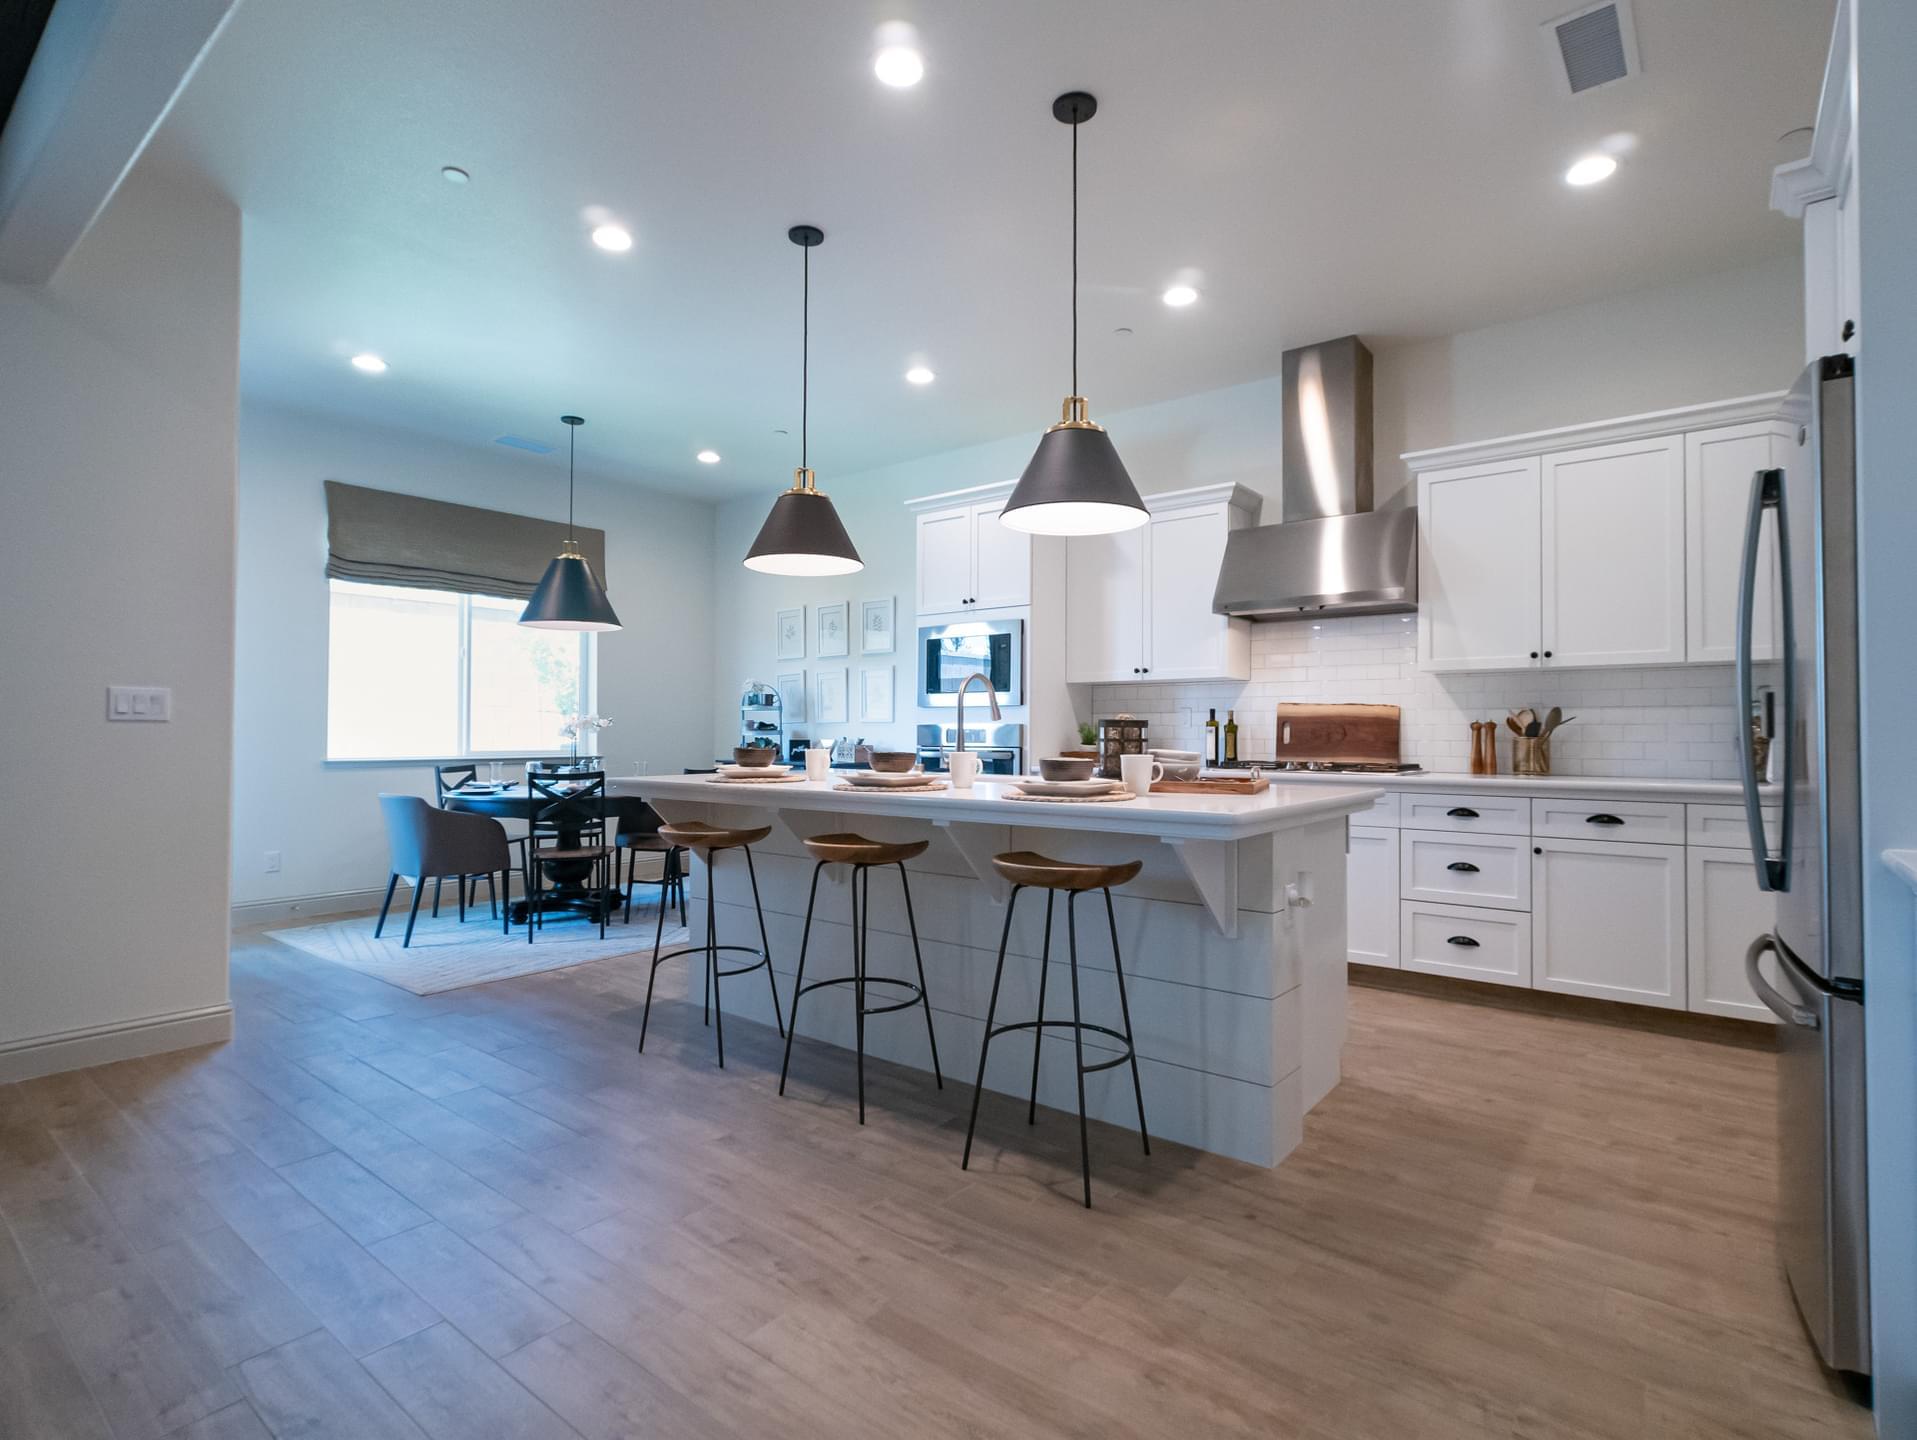 Summerlin Walk Preview Appointment